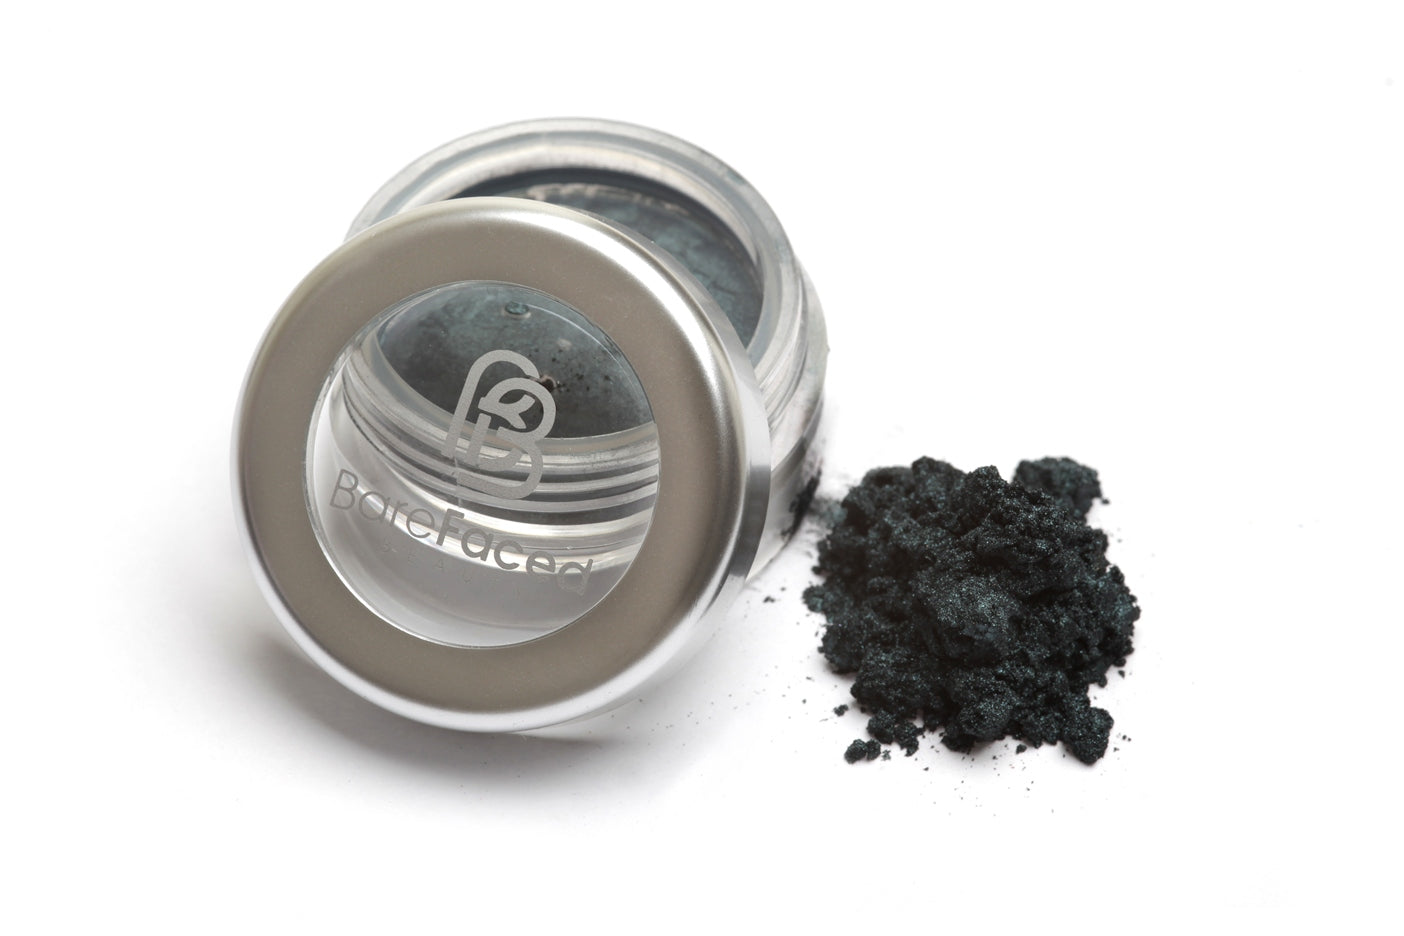 A small round pot of mineral eyeshadow, with a swatch of the powder next to it showing a shimmery black shade with a hint of blue and green